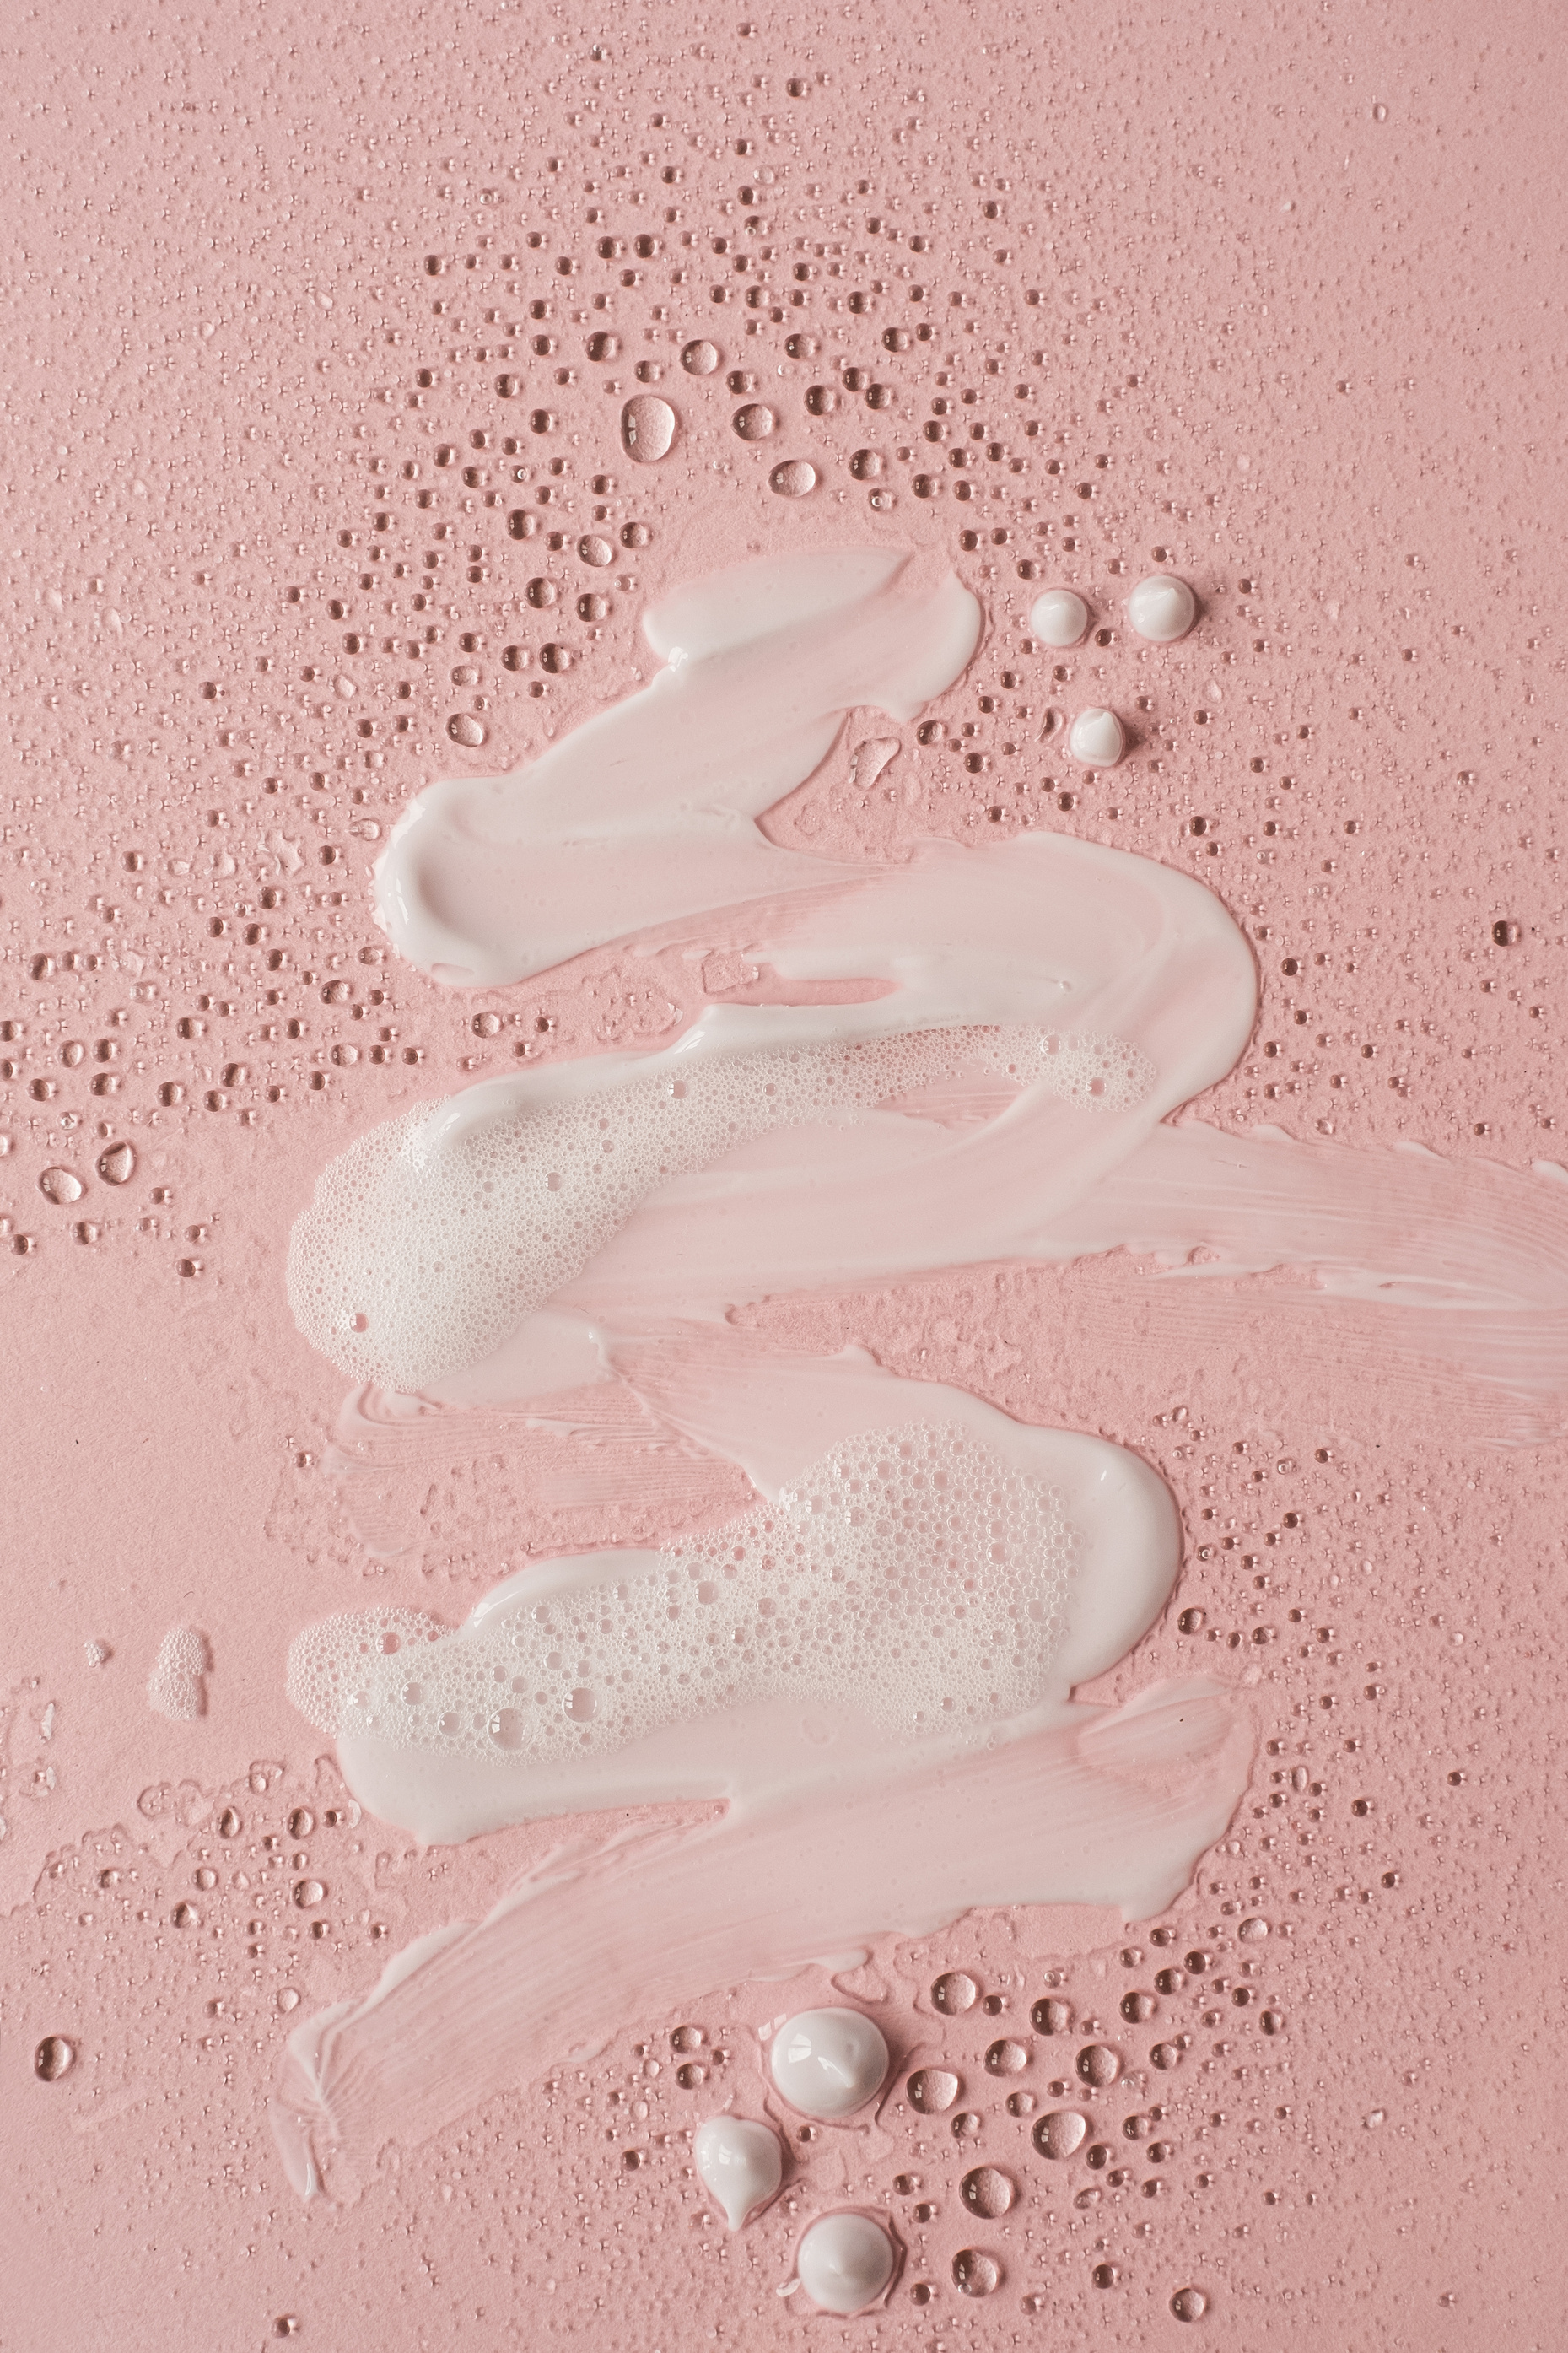 Skincare Cream Swatches on Pink Background 